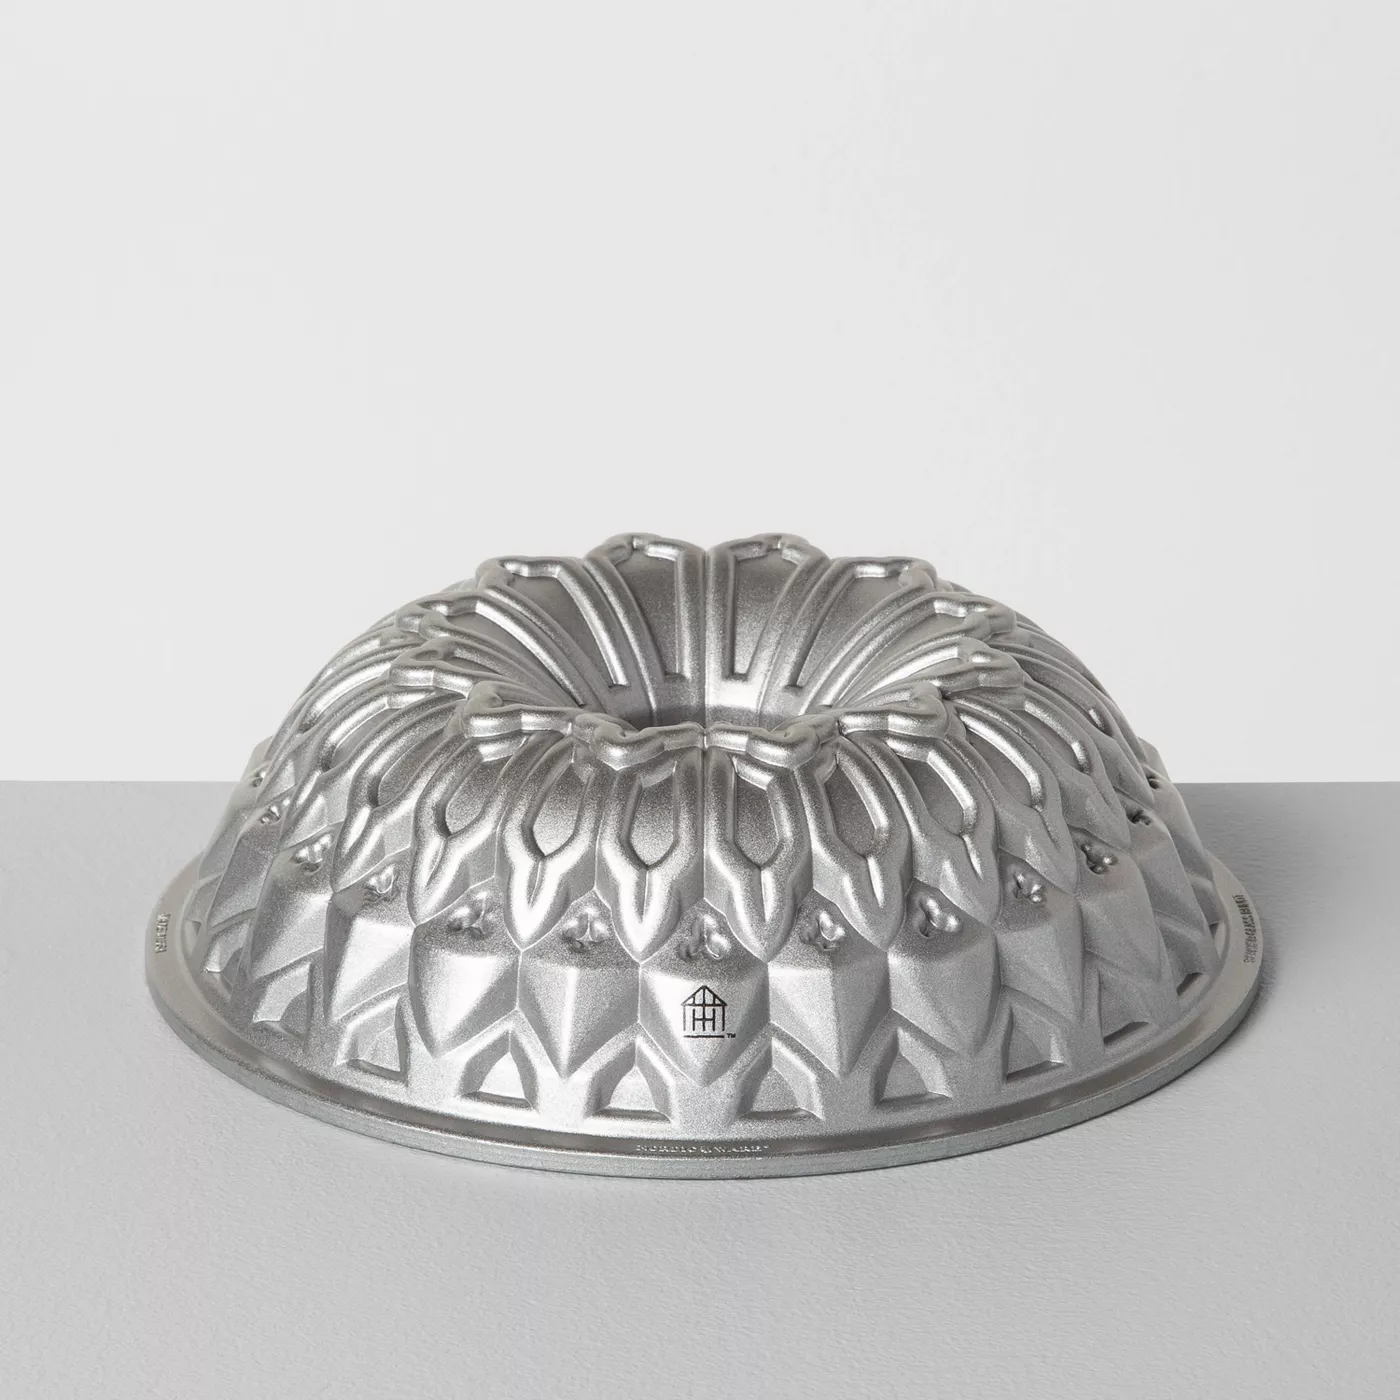 9 Cup Bundt Pan - Hearth & Hand™ with Magnolia - image 1 of 4